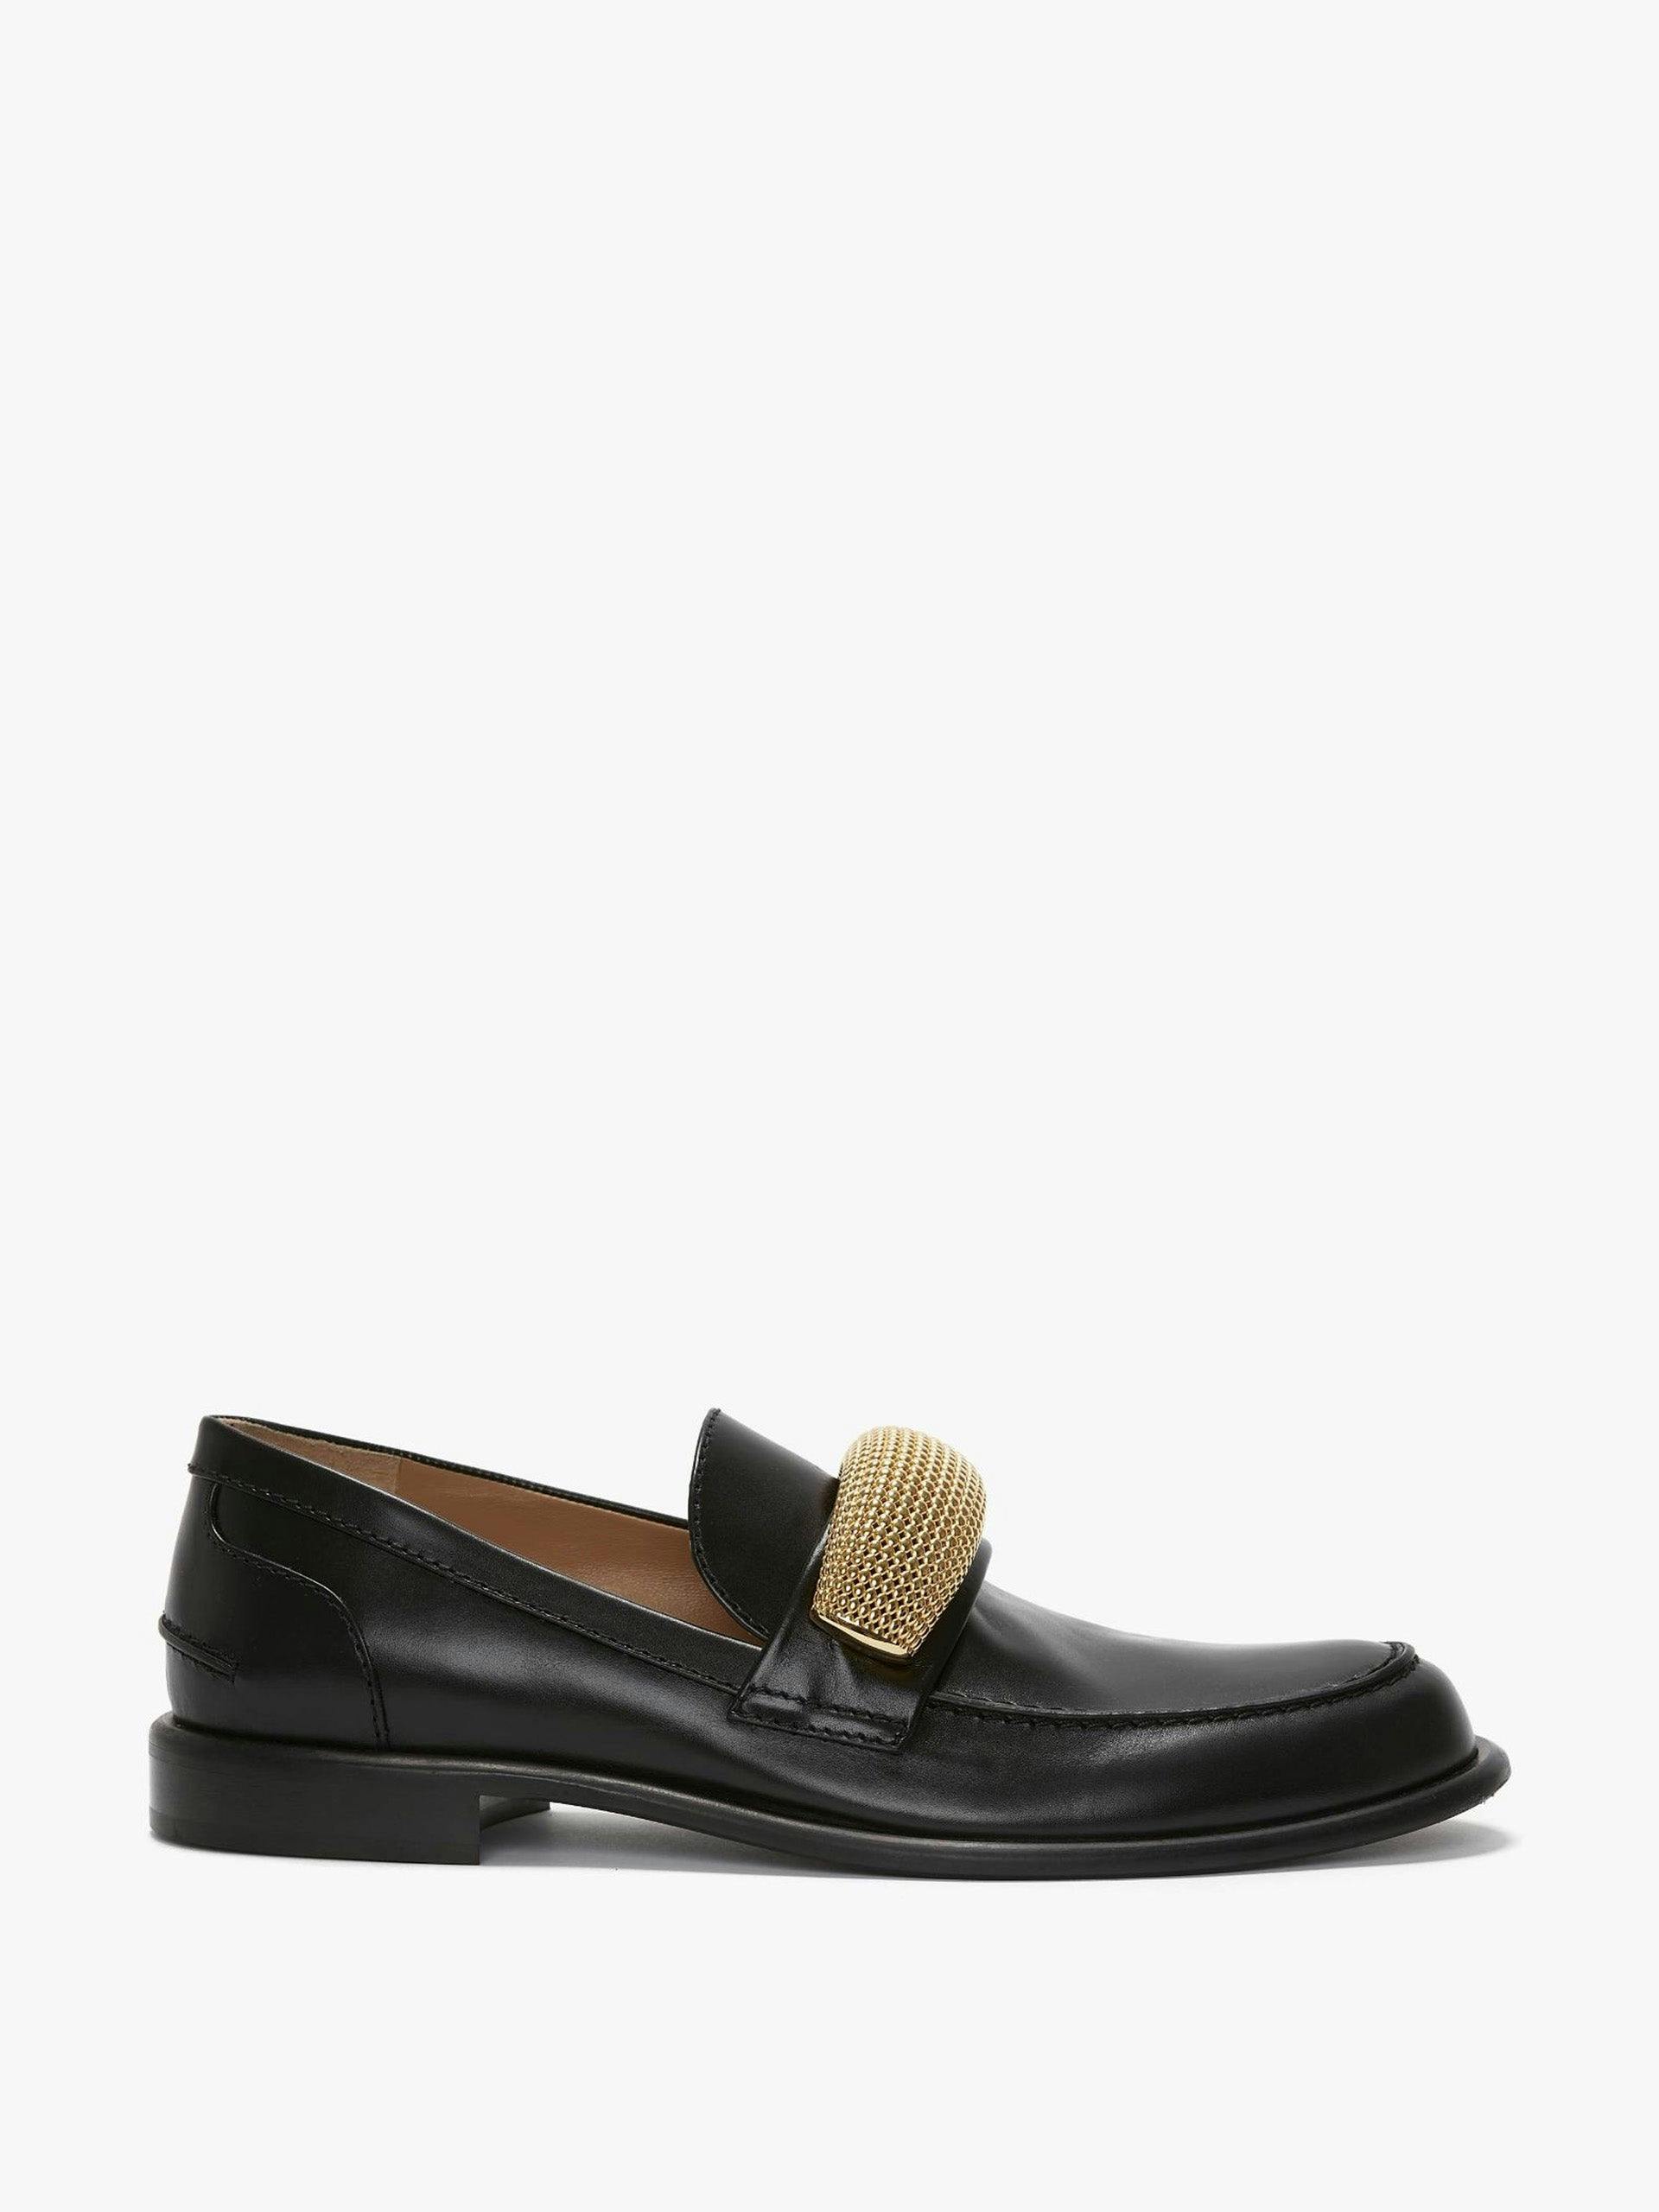 Leather moccasin loafers